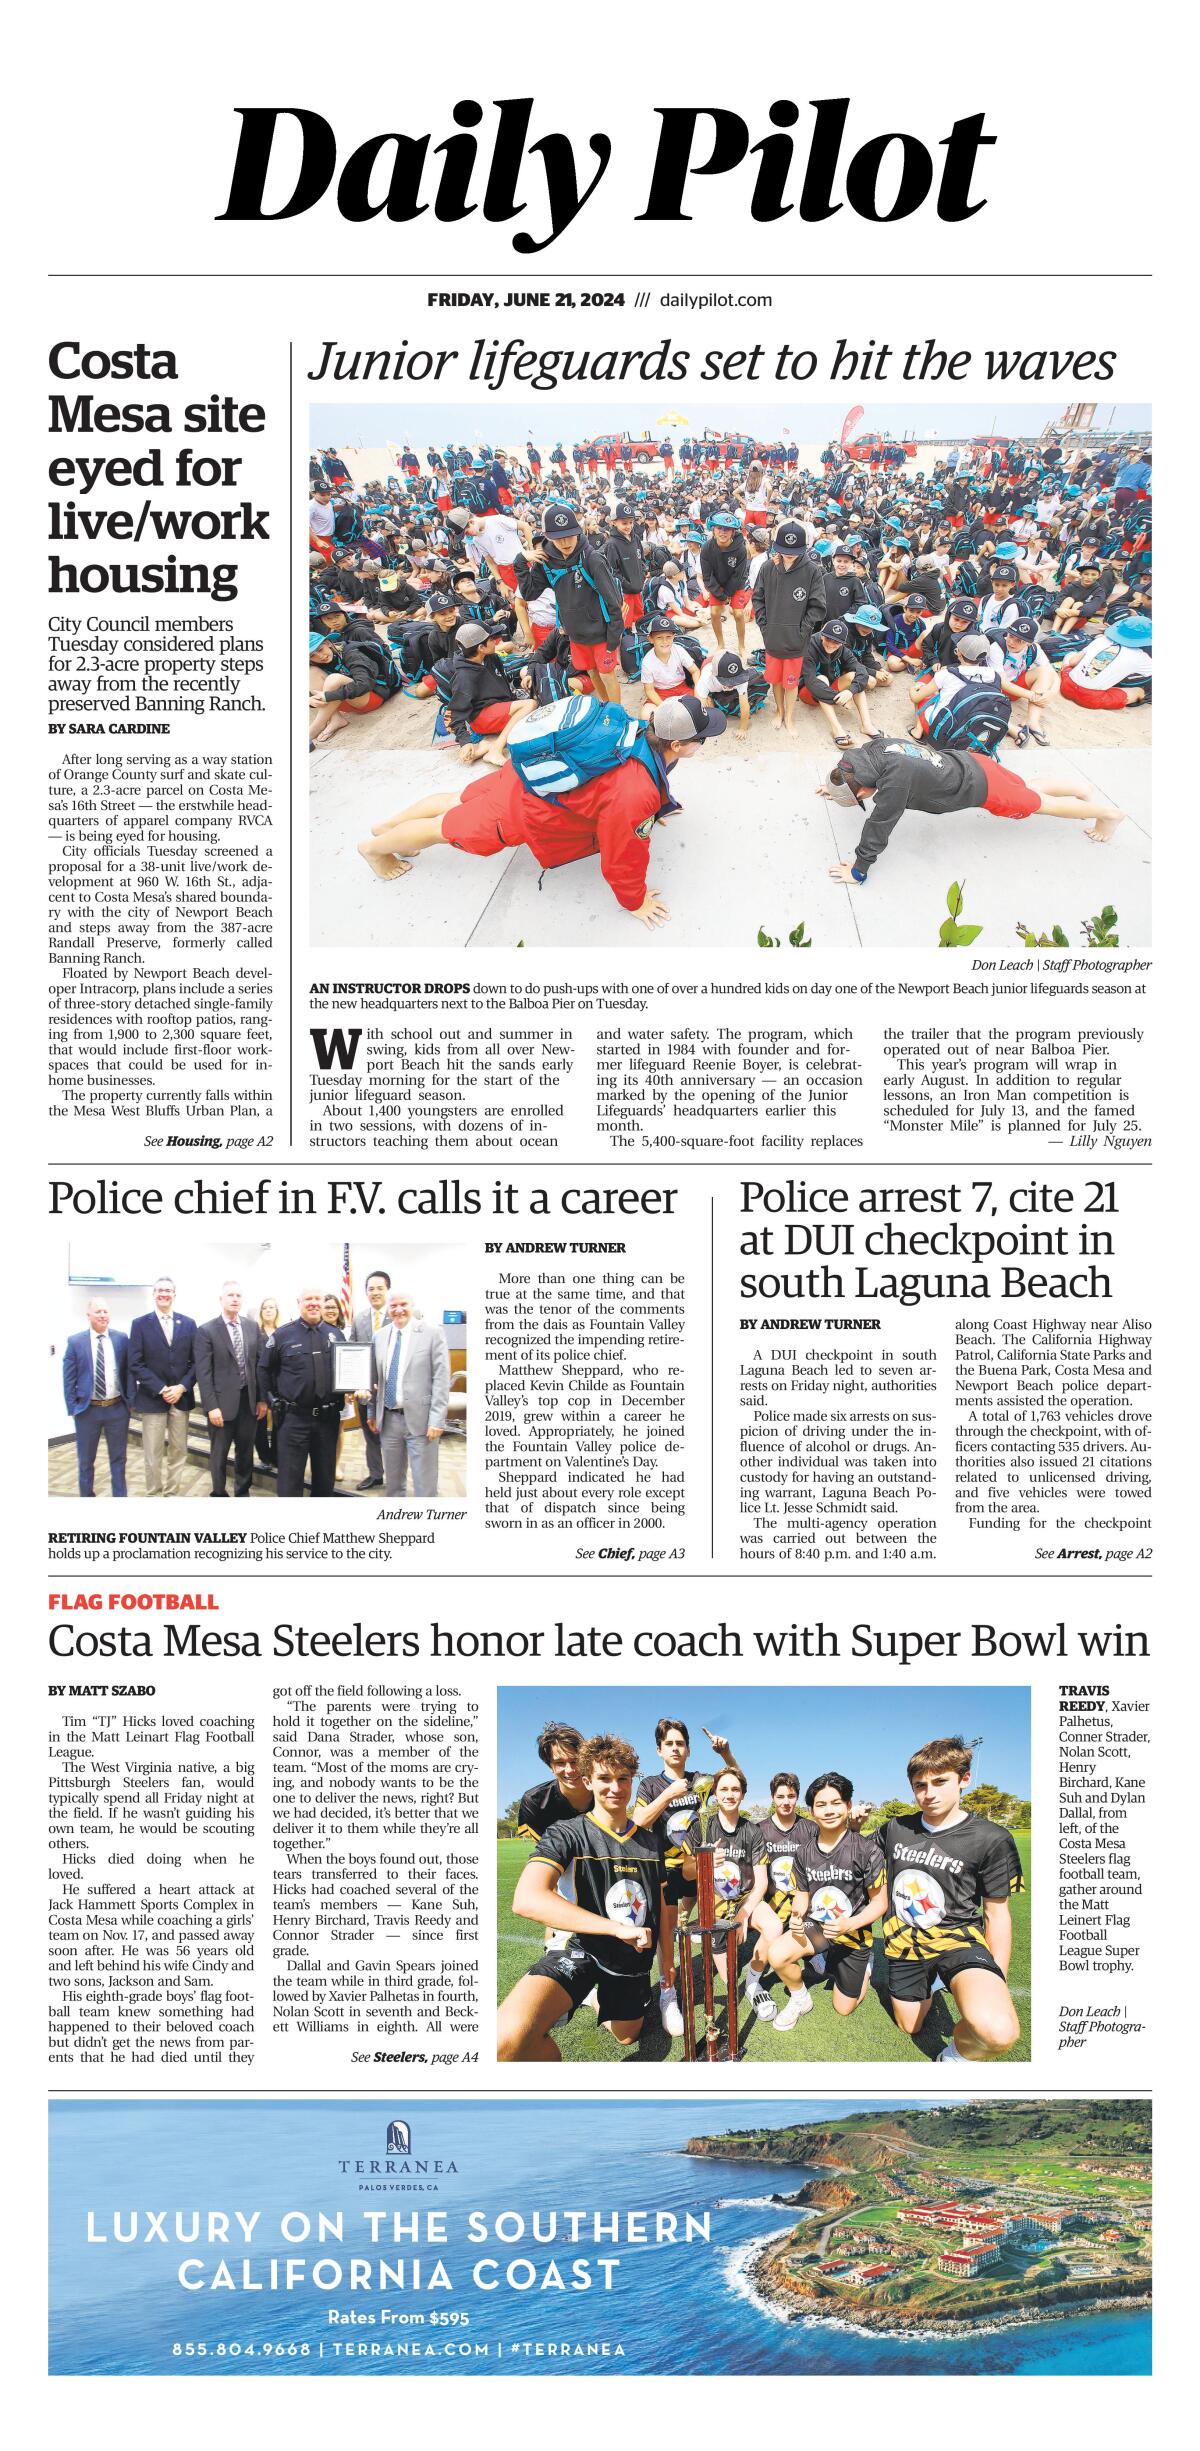 Front page of the Daily Pilot e-newspaper for Friday, June 21, 2024.